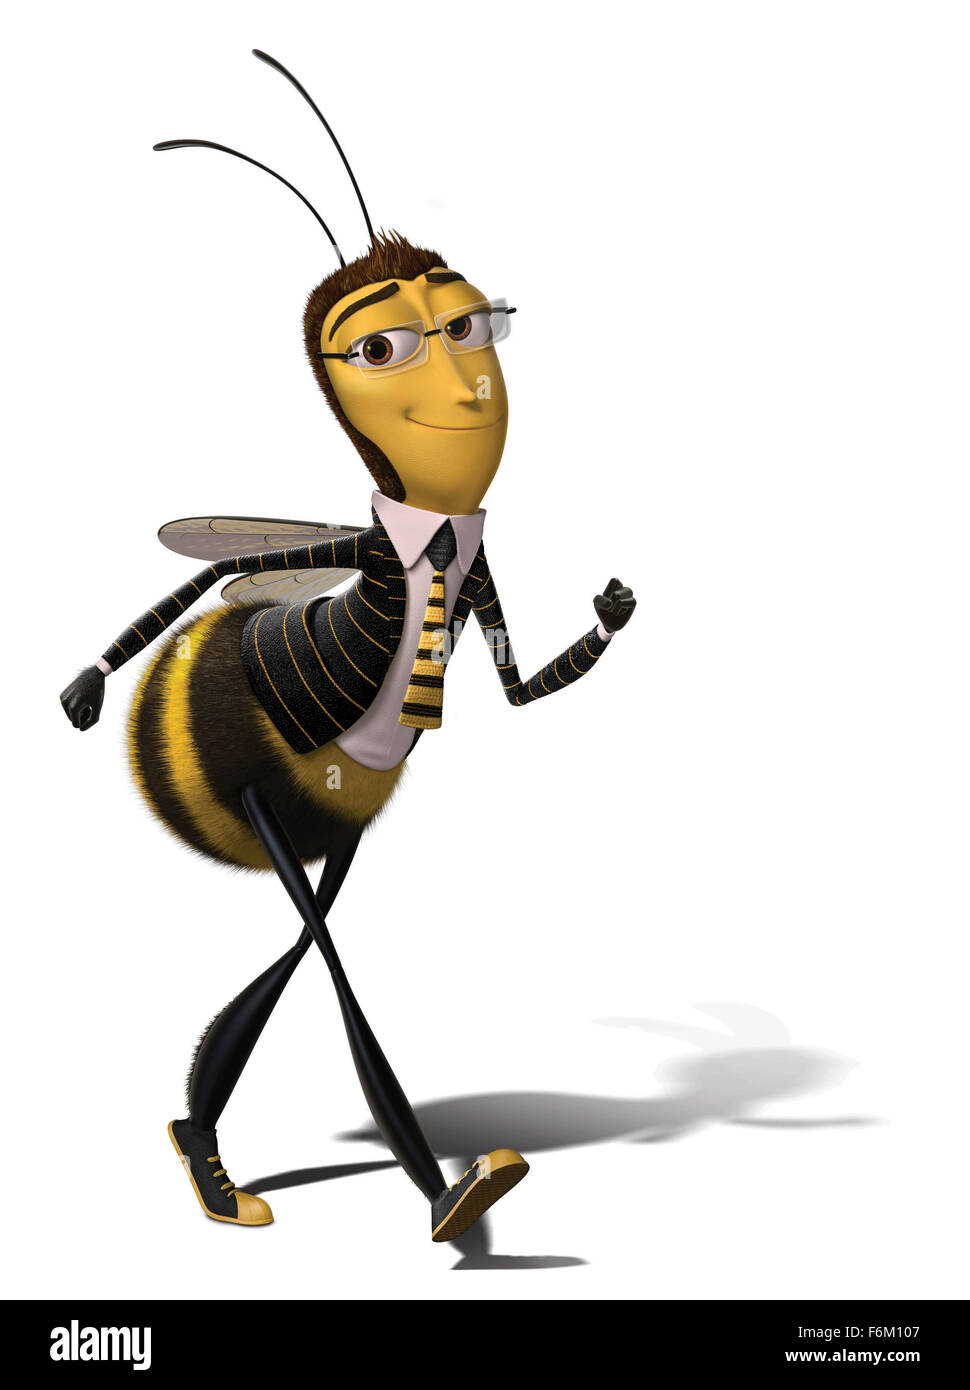 RELEASE DATE: November 2, 2007. MOVIE TITLE: Bee Movie - STUDIO: Paramount Pictures. PLOT: Barry B. Benson (Seinfeld), a bee who has just graduated from college, is disillusioned at his lone career choice: making honey. On a special trip outside the hive, Barry's life is saved by Vanessa (Zellweger), a florist in New York City. As their relationship blossoms, he discovers humans actually eat honey, and subsequently decides to sue us. PICTURED: JERRY SEINFELD as the voice of Barry B. Benson. Stock Photo